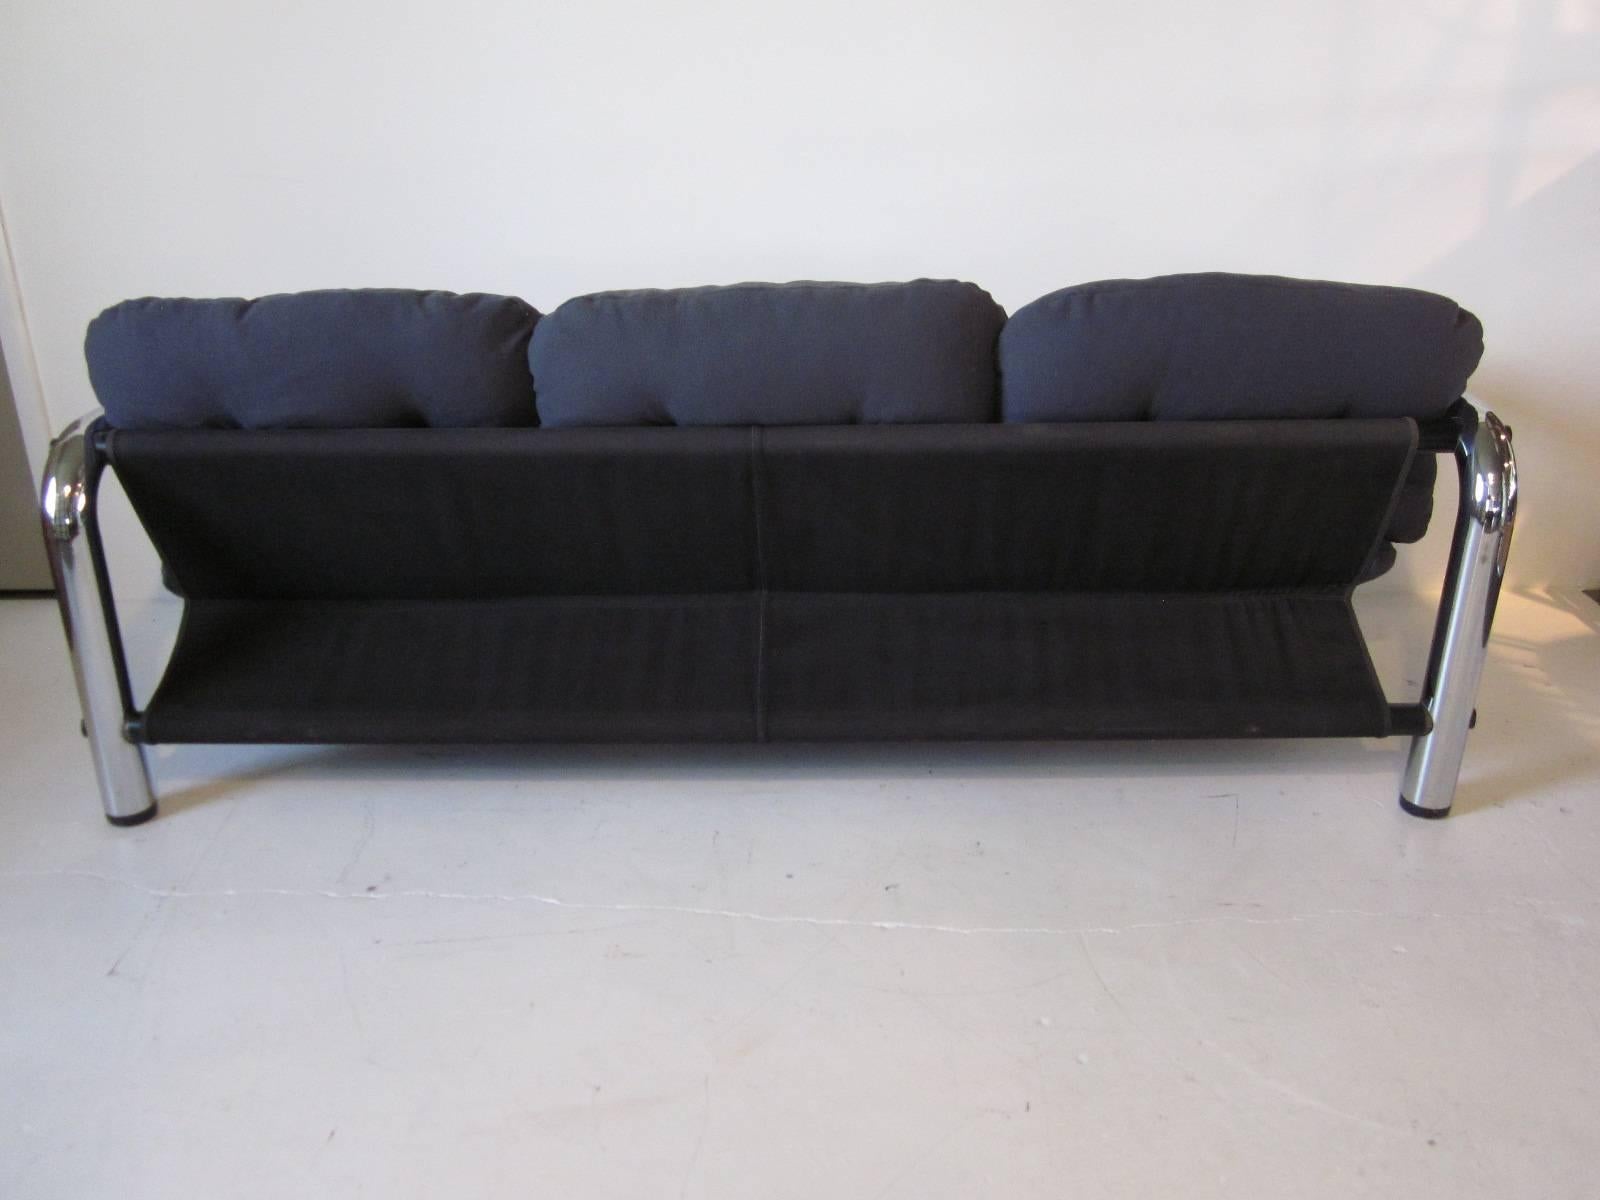 A modern styled tubular chrome metal sofa with charcoal toned canvas sling support topped with comfy gray steel blue upholstered cushions. A true design statement from the swing'in 1970s Op Art movement.